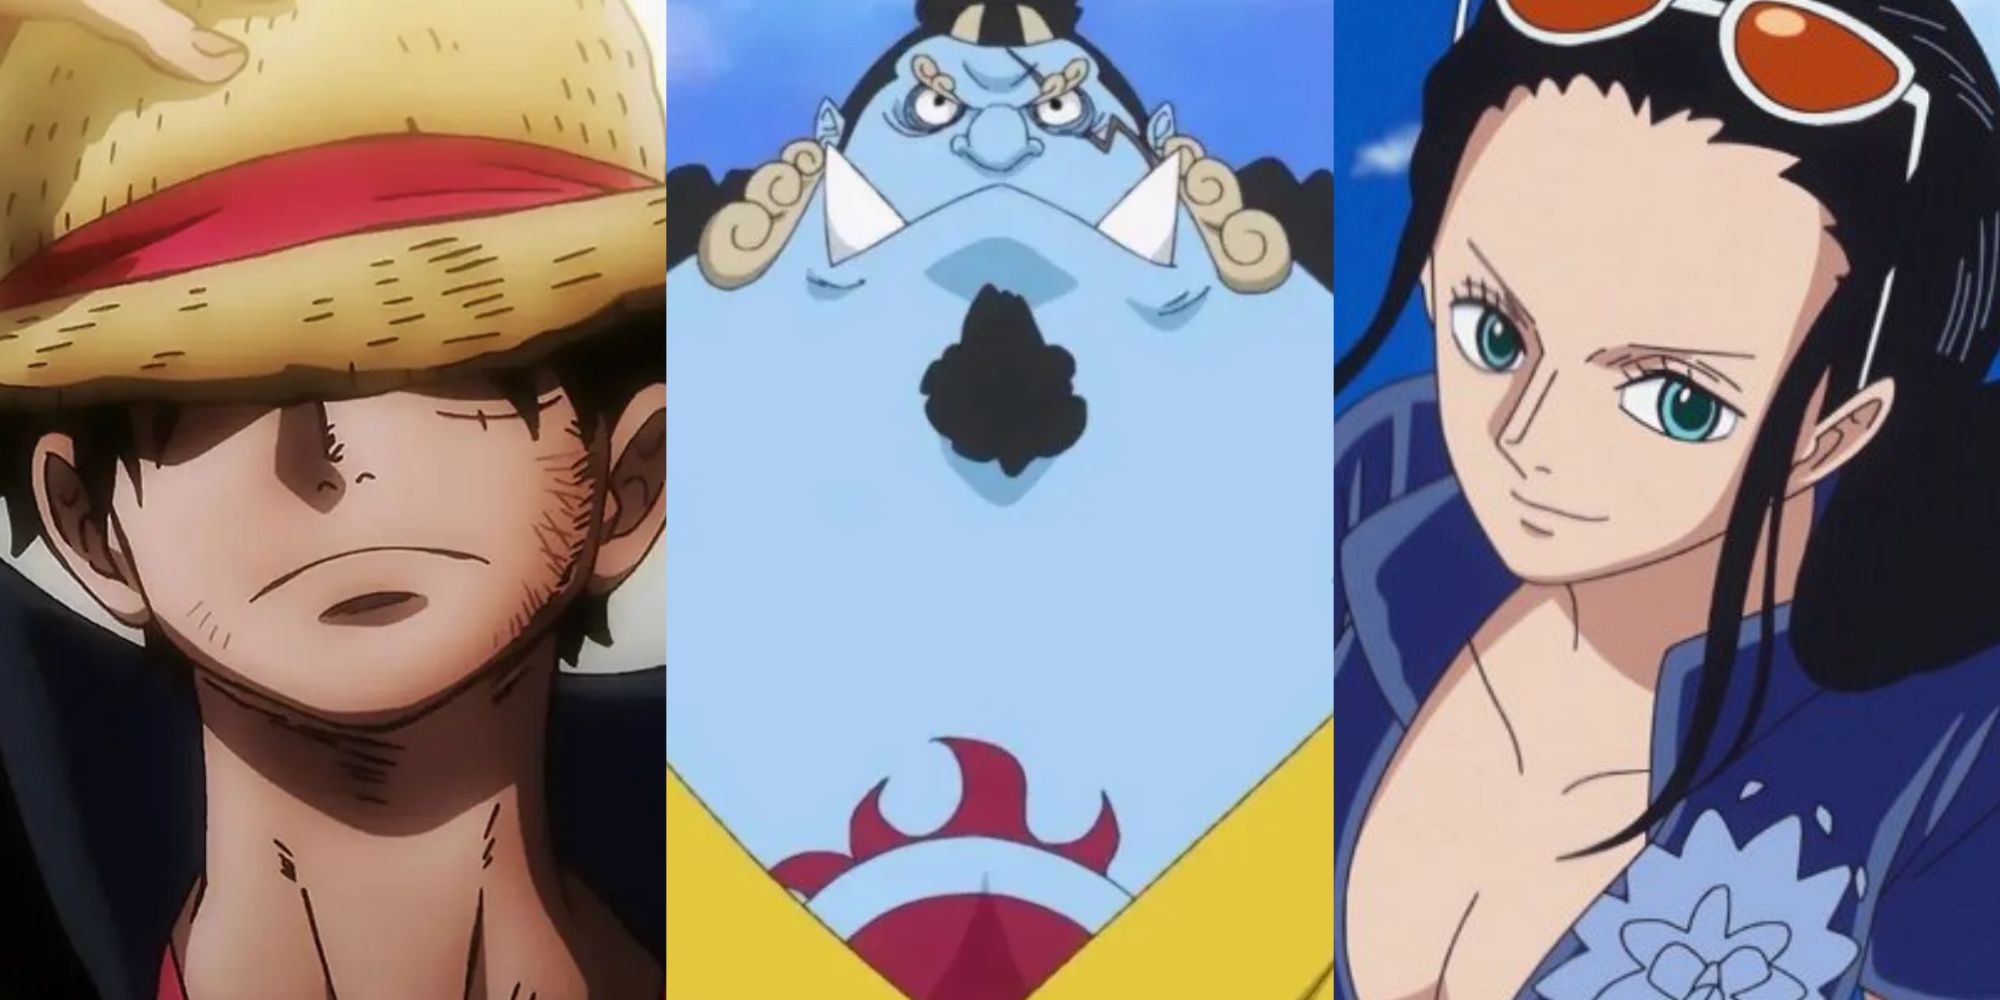 A collage showing Luffy, Jinbei, and Robin.